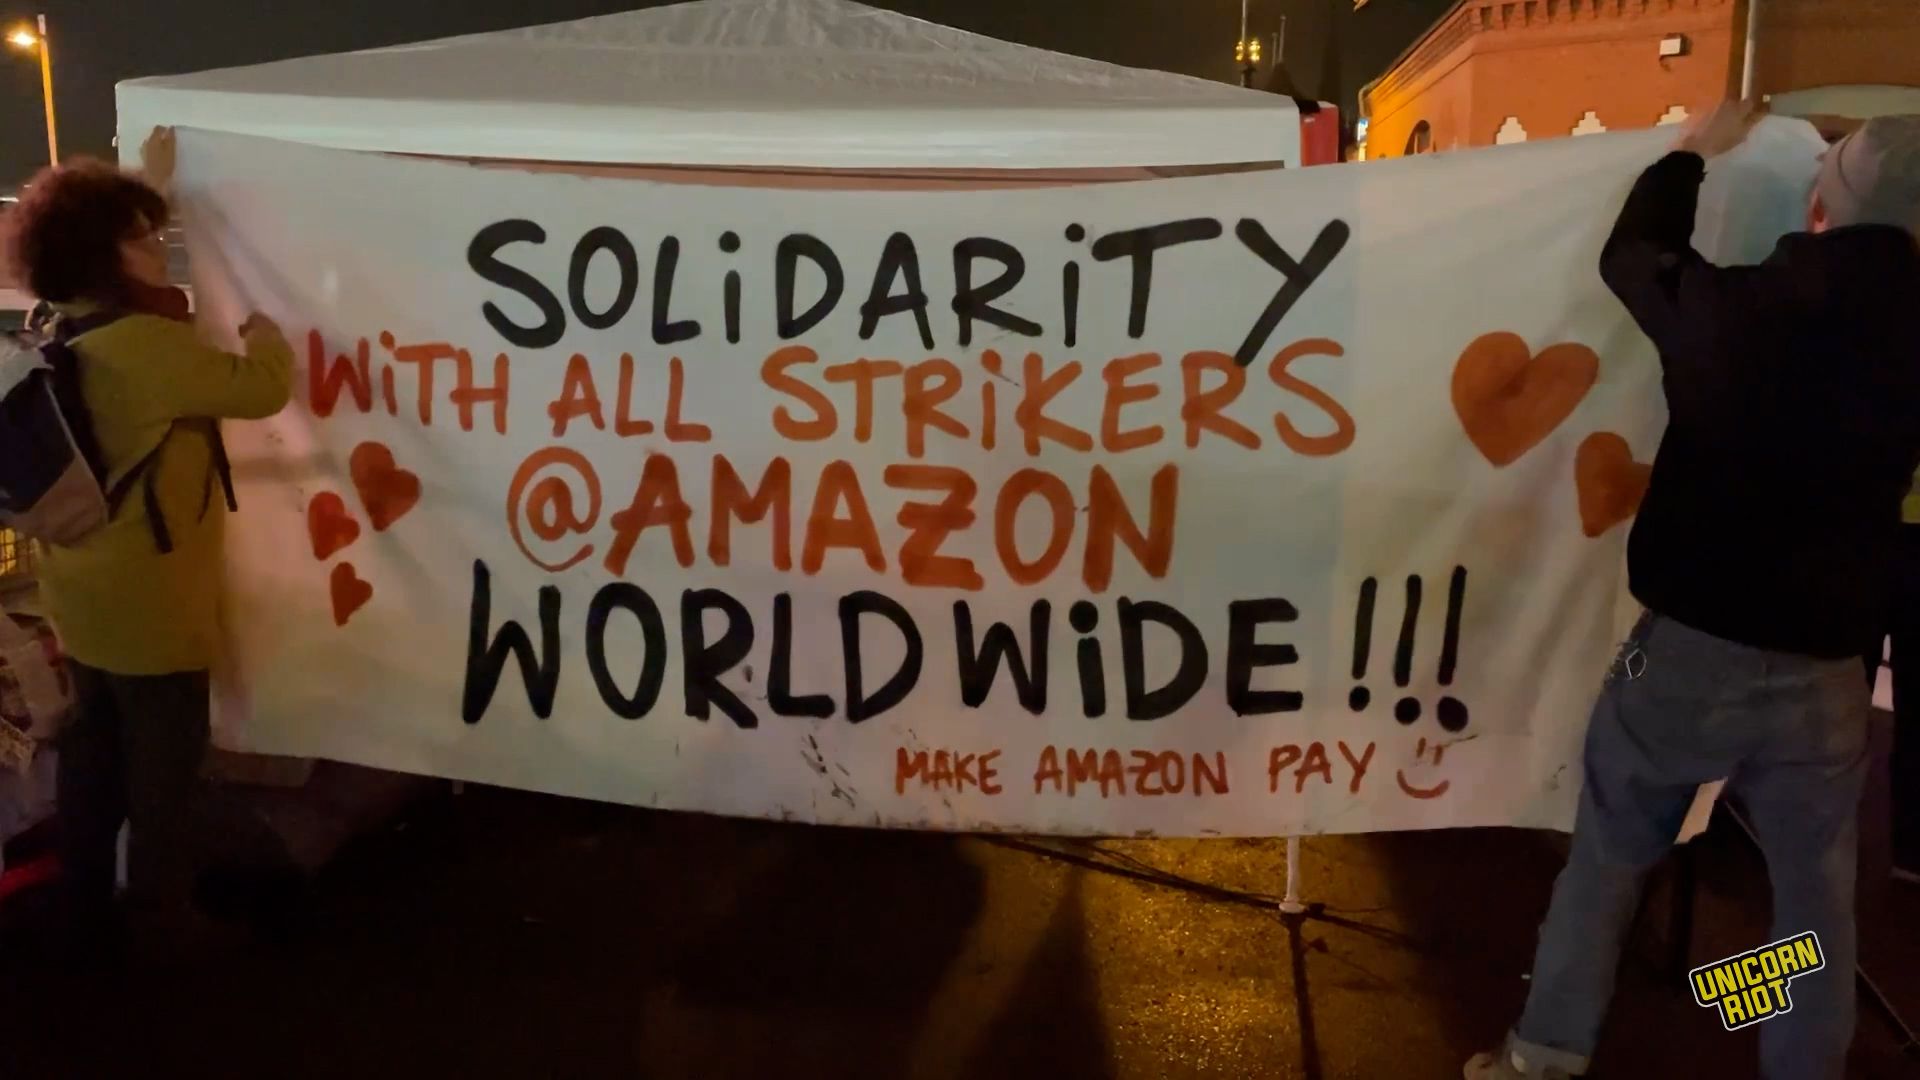 Workers Turn Black Friday into 'Make Amazon Pay Day' - UNICORN RIOT